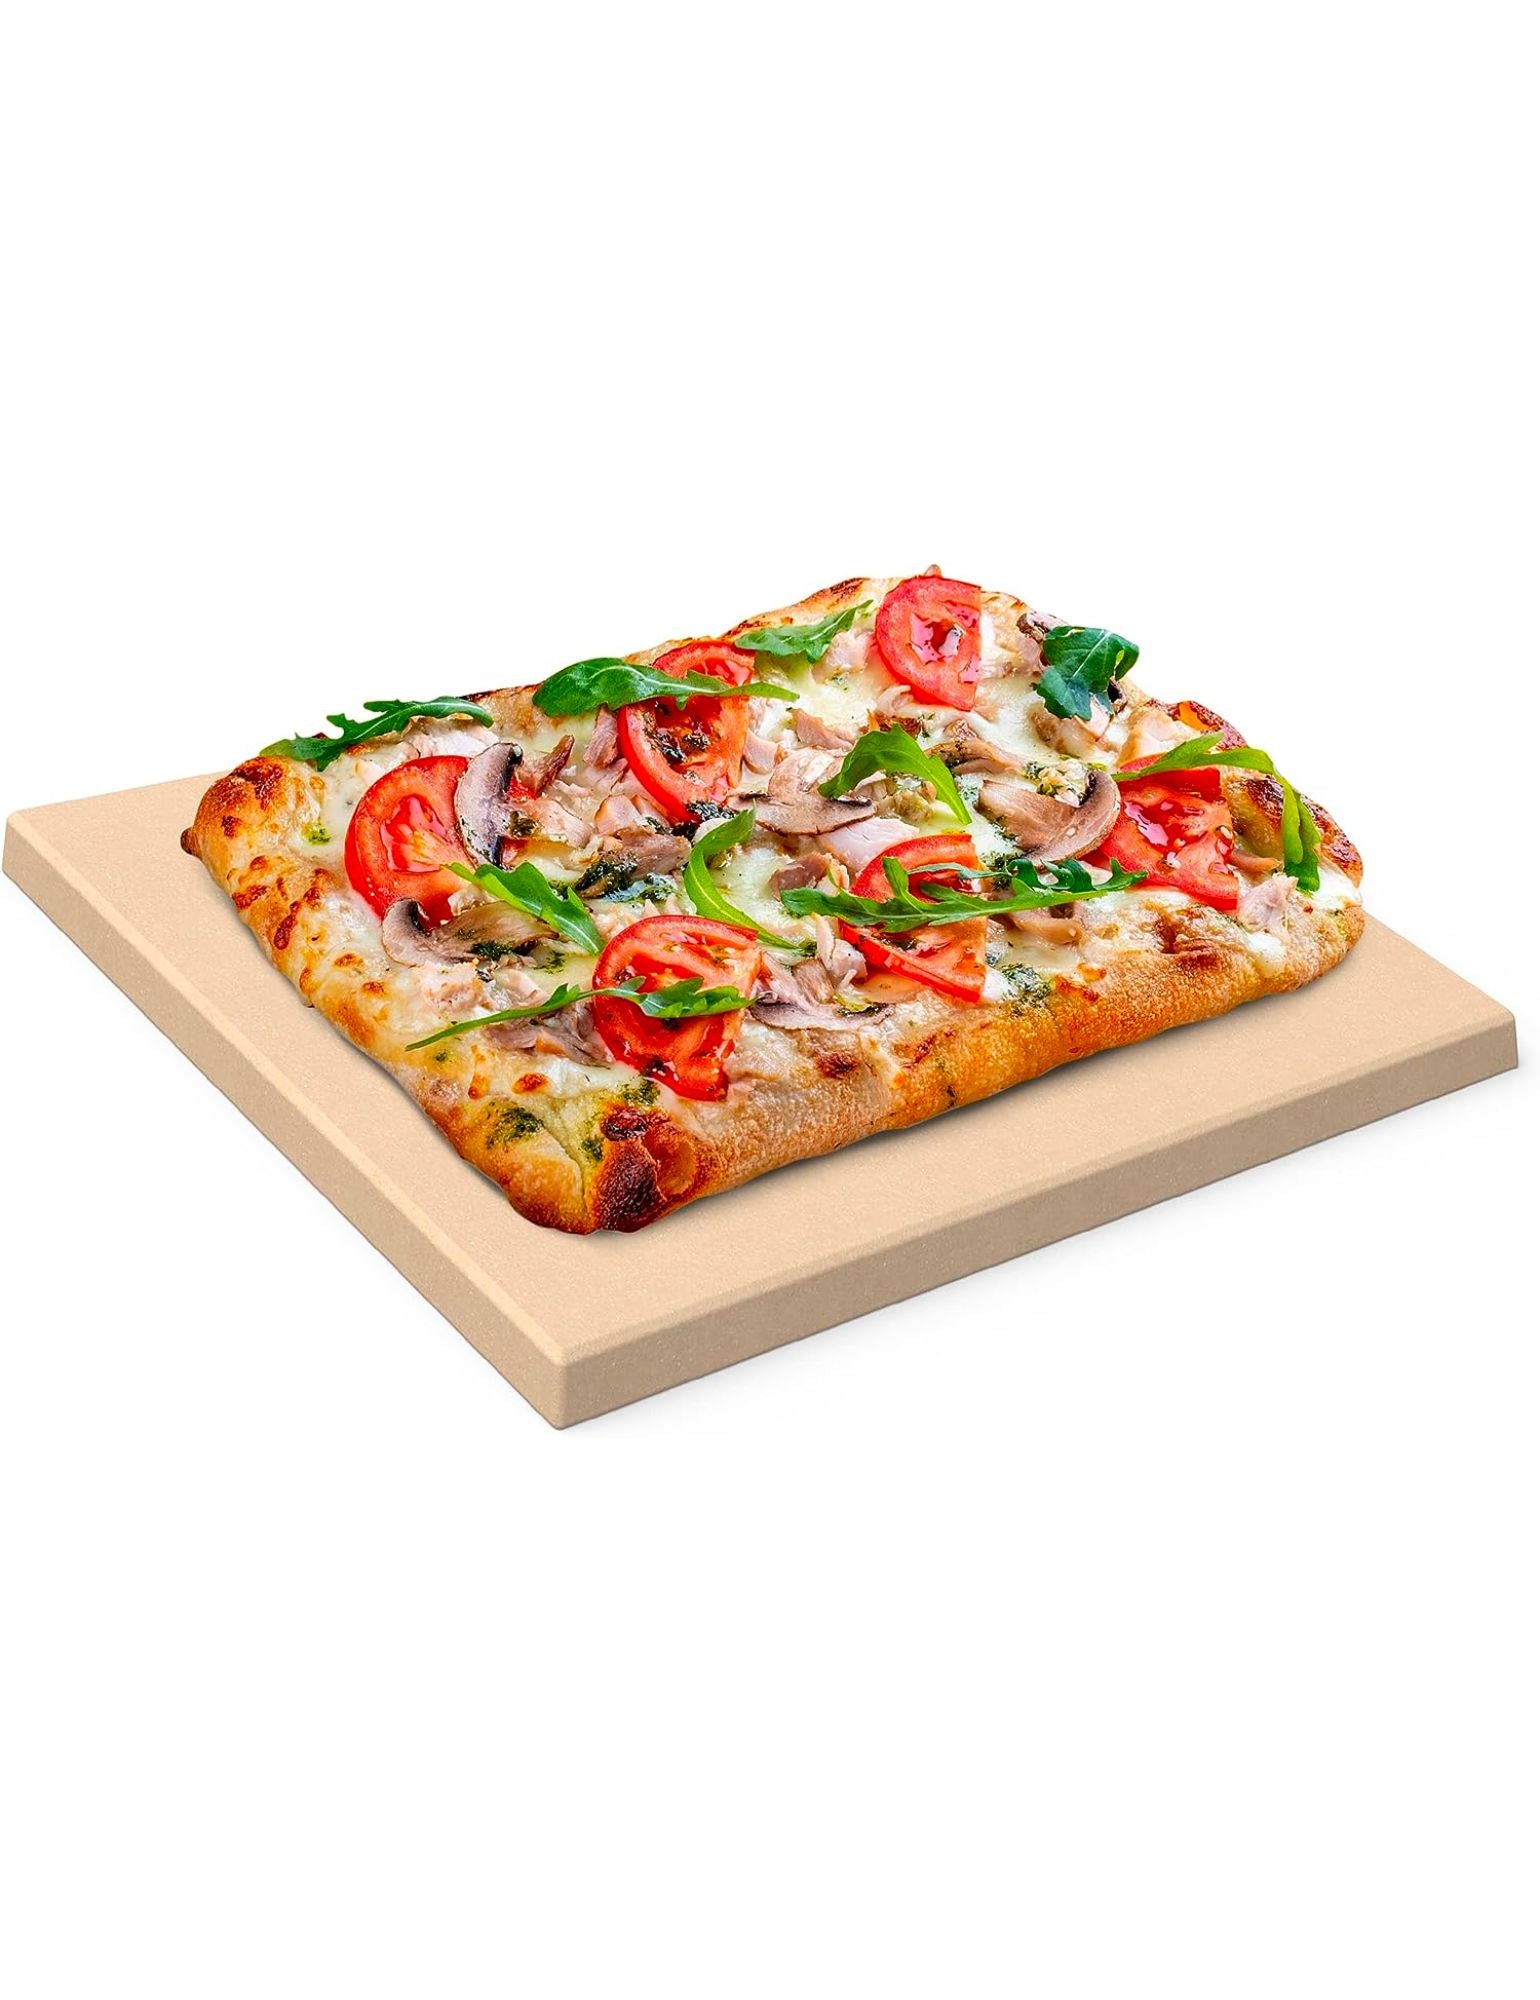 Rectangle Pizza Stone, 15" x 12", Cordierite Natural Stone for Baking Ovens and Grills